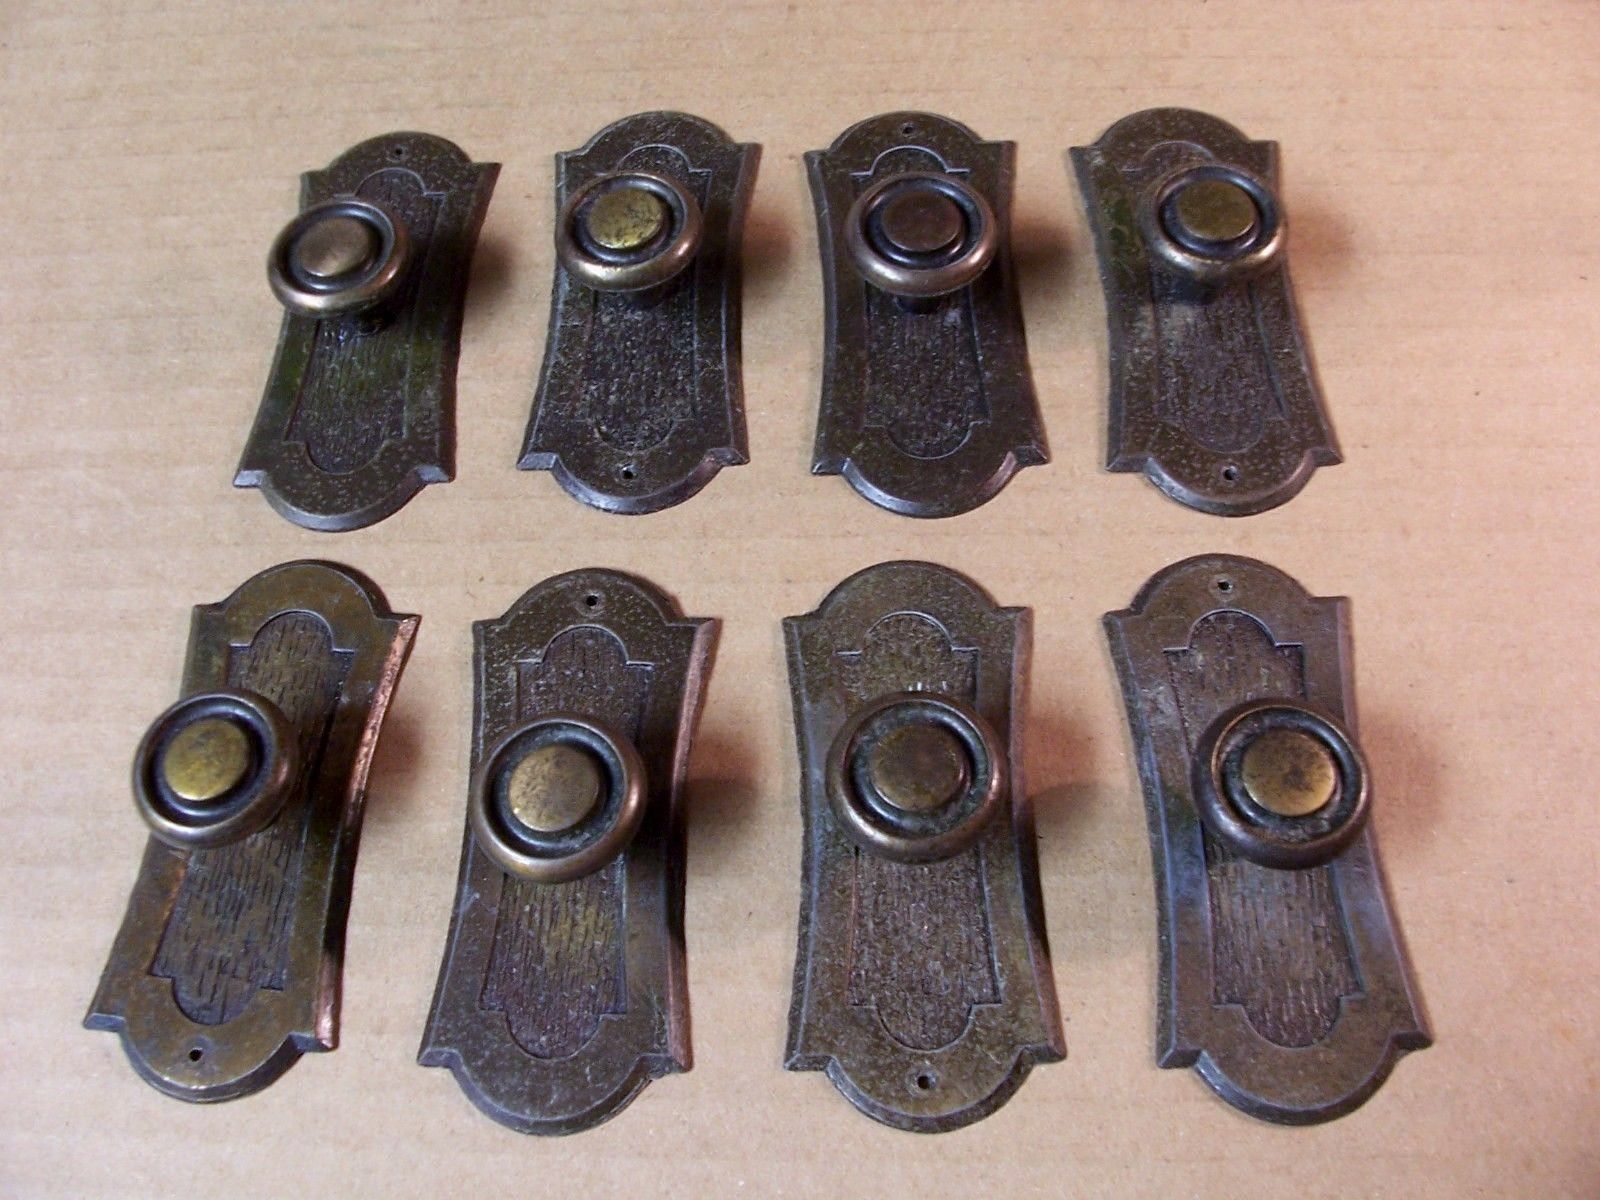 (8) VINTAGE DRAWER PULLS / HANDLES WITH BACK PLATES - DOOR PULLS - BRASS FINISH